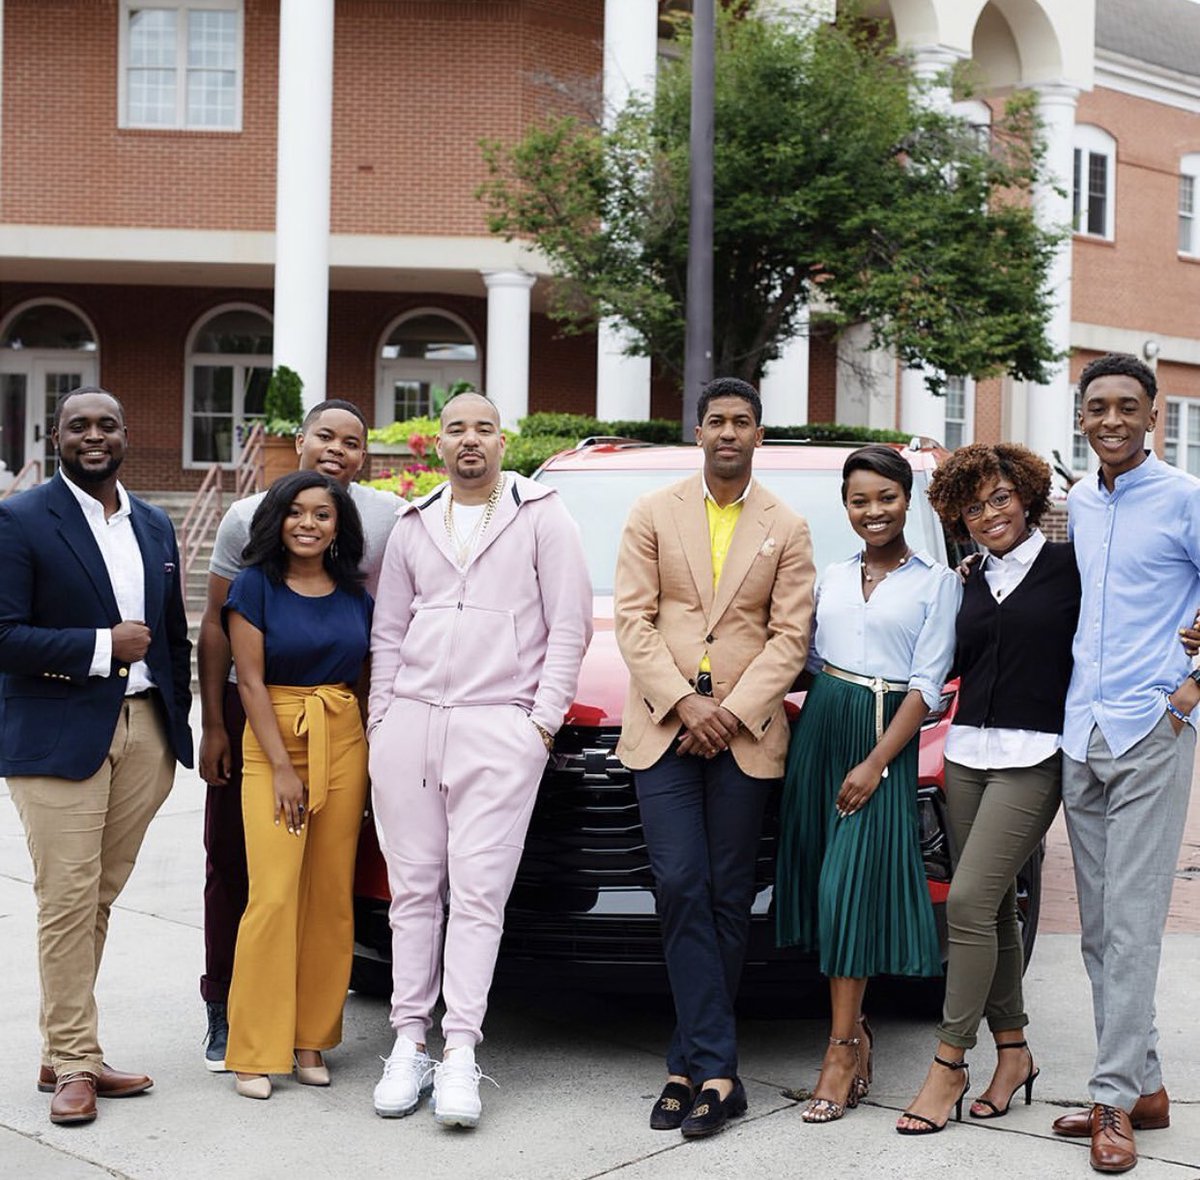 This was just the beginning! Stay tuned for all the fantastic stories our DTU fellows are reporting while traveling in style in the All-New Chevrolet Blazer #ChevroletDTU #DTU2019 #blackexcellence @tedevision @sharonjoyy @elaex_ @_tylamonique @emanirashad @miana_minae